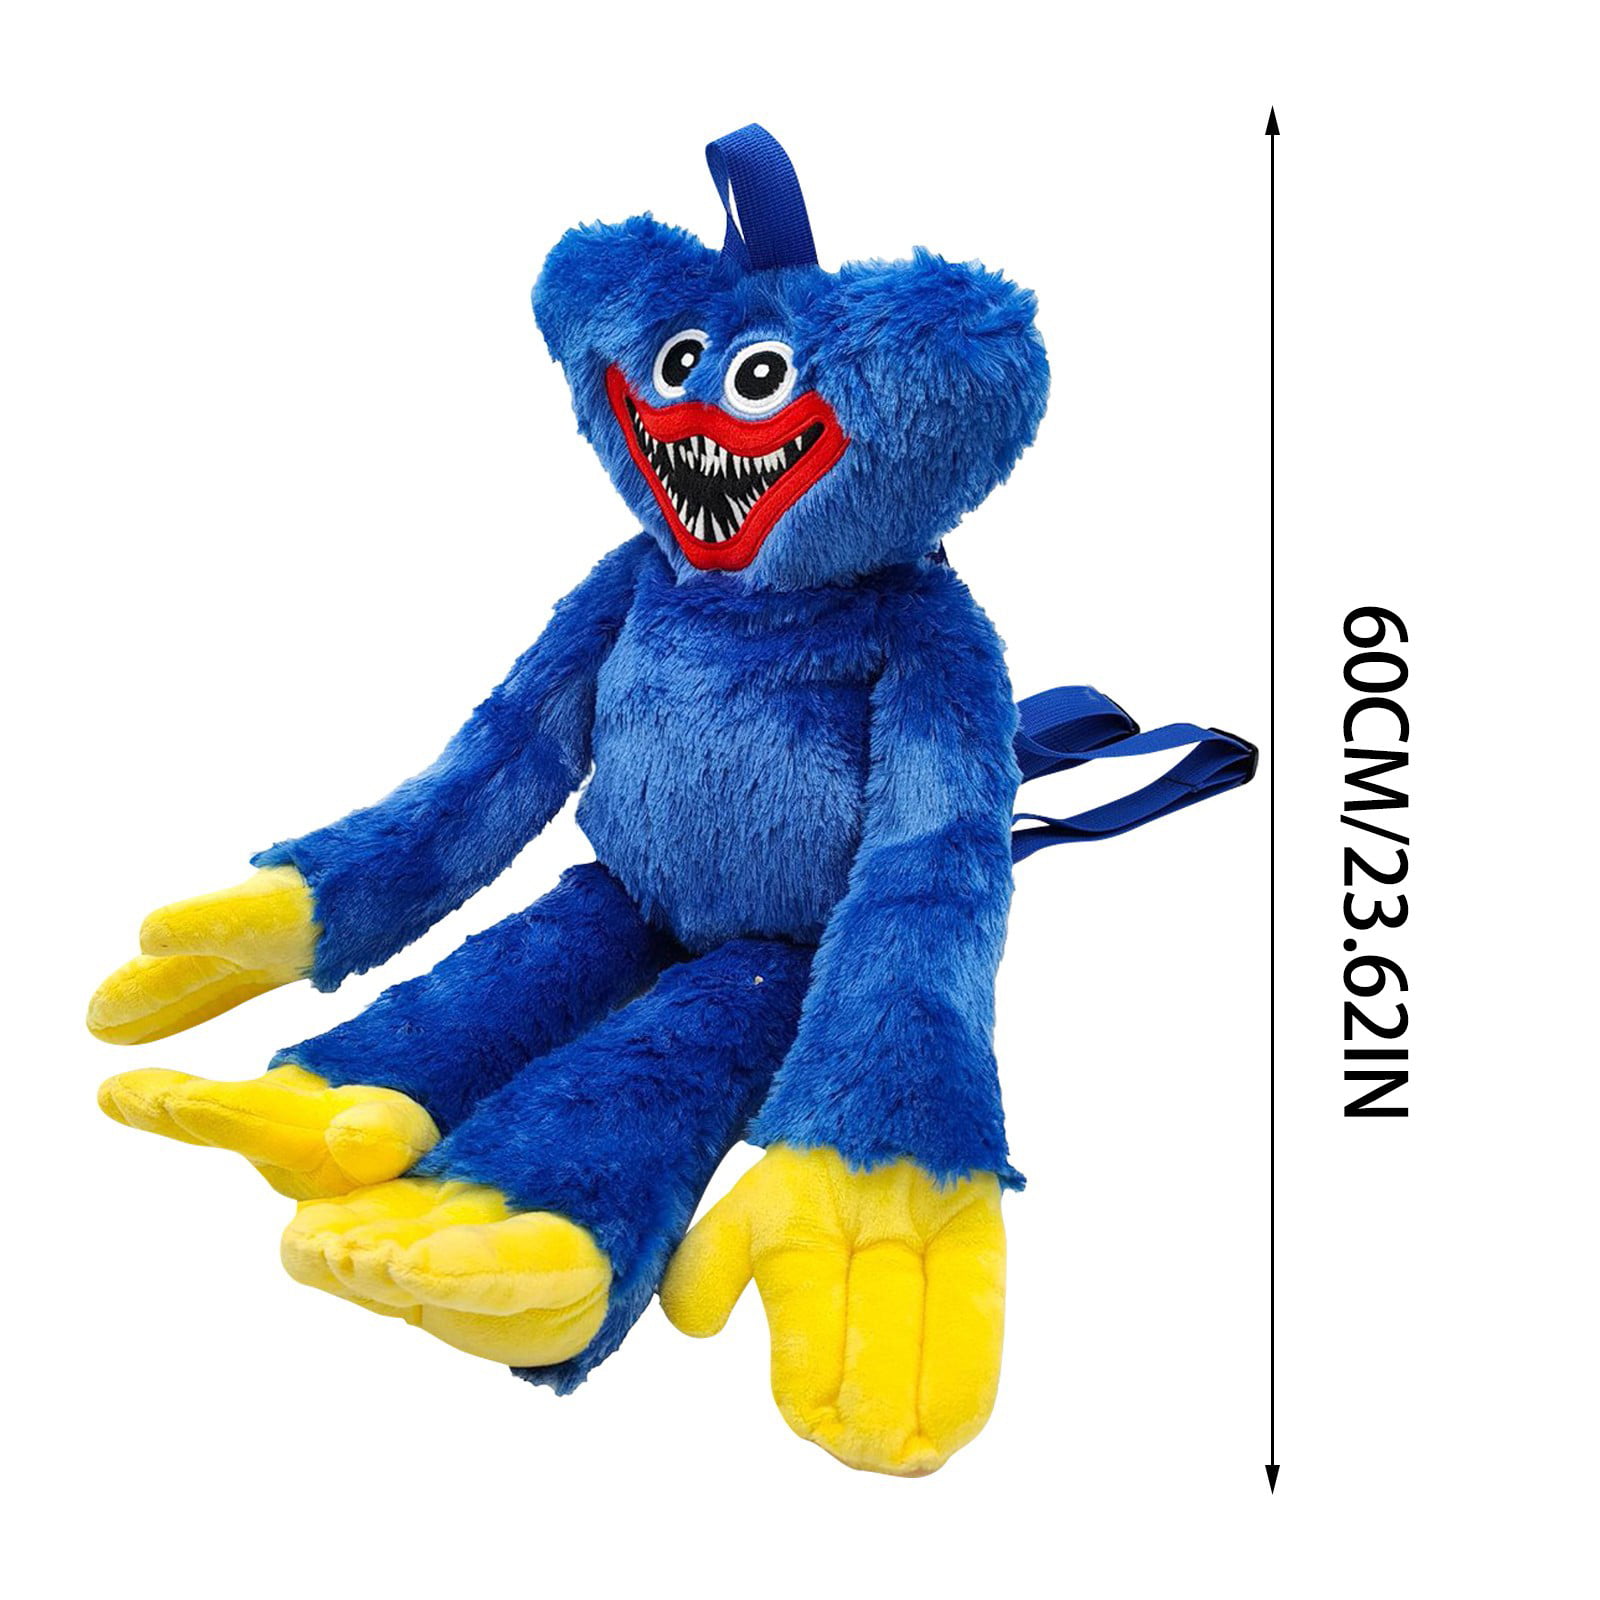 Blue Scary and Funny Plush Doll 2 Pcs Huggy Wuggy Plush Toy Suitable for Birthday Present and Friends Beautifully Plush Doll Gifts 15.7 in 